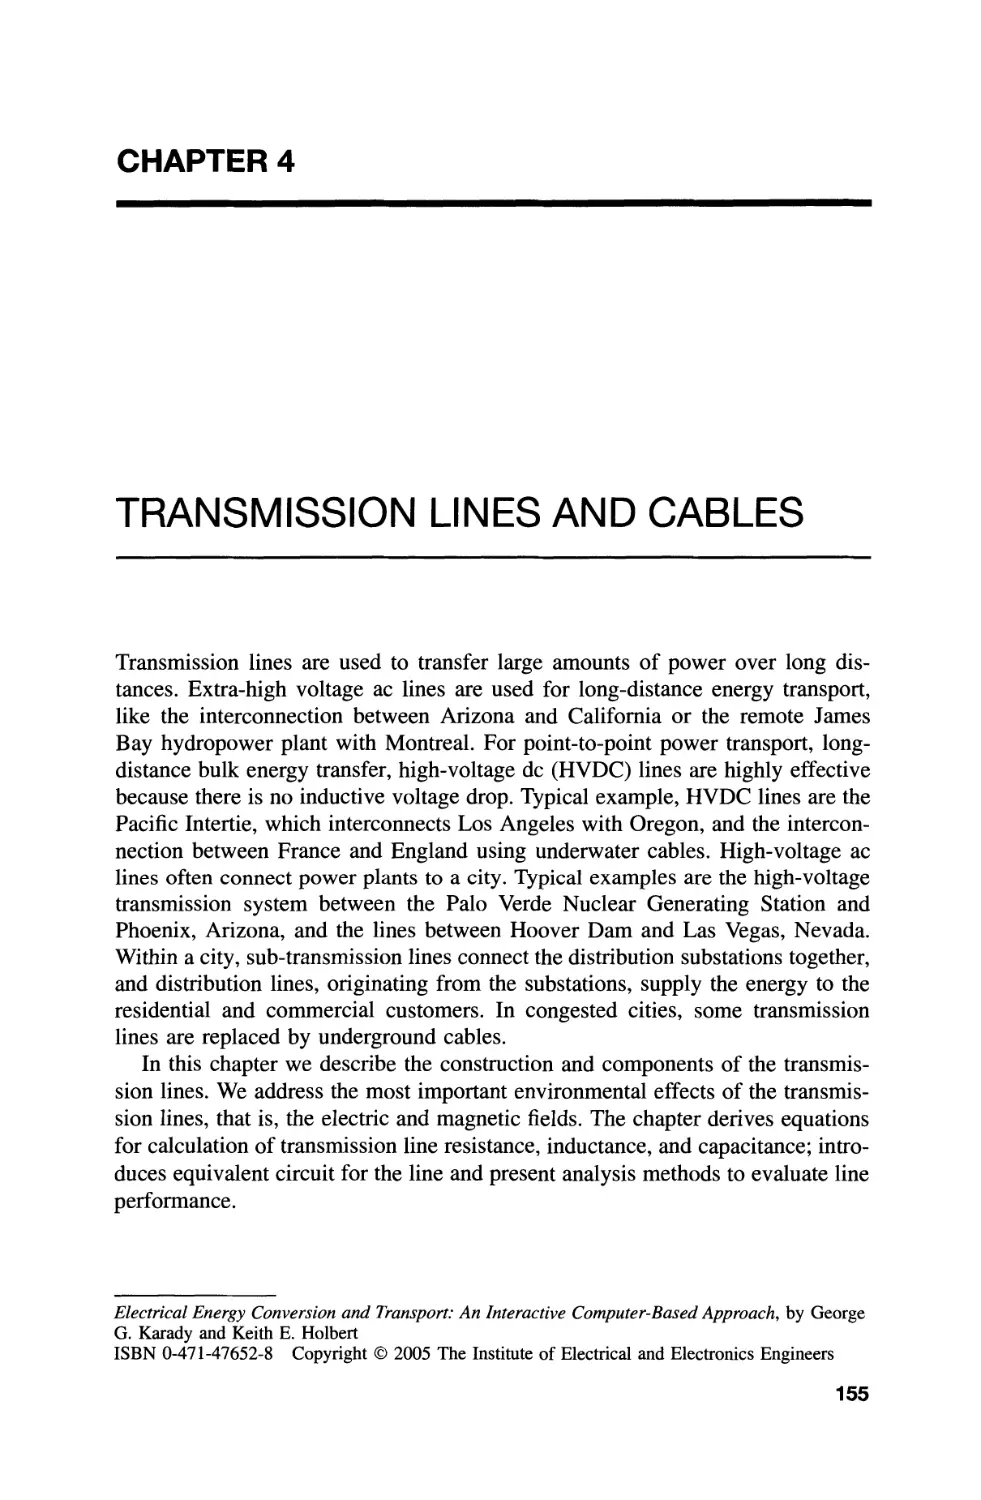 4 TRANSMISSION LINES AND CABLES